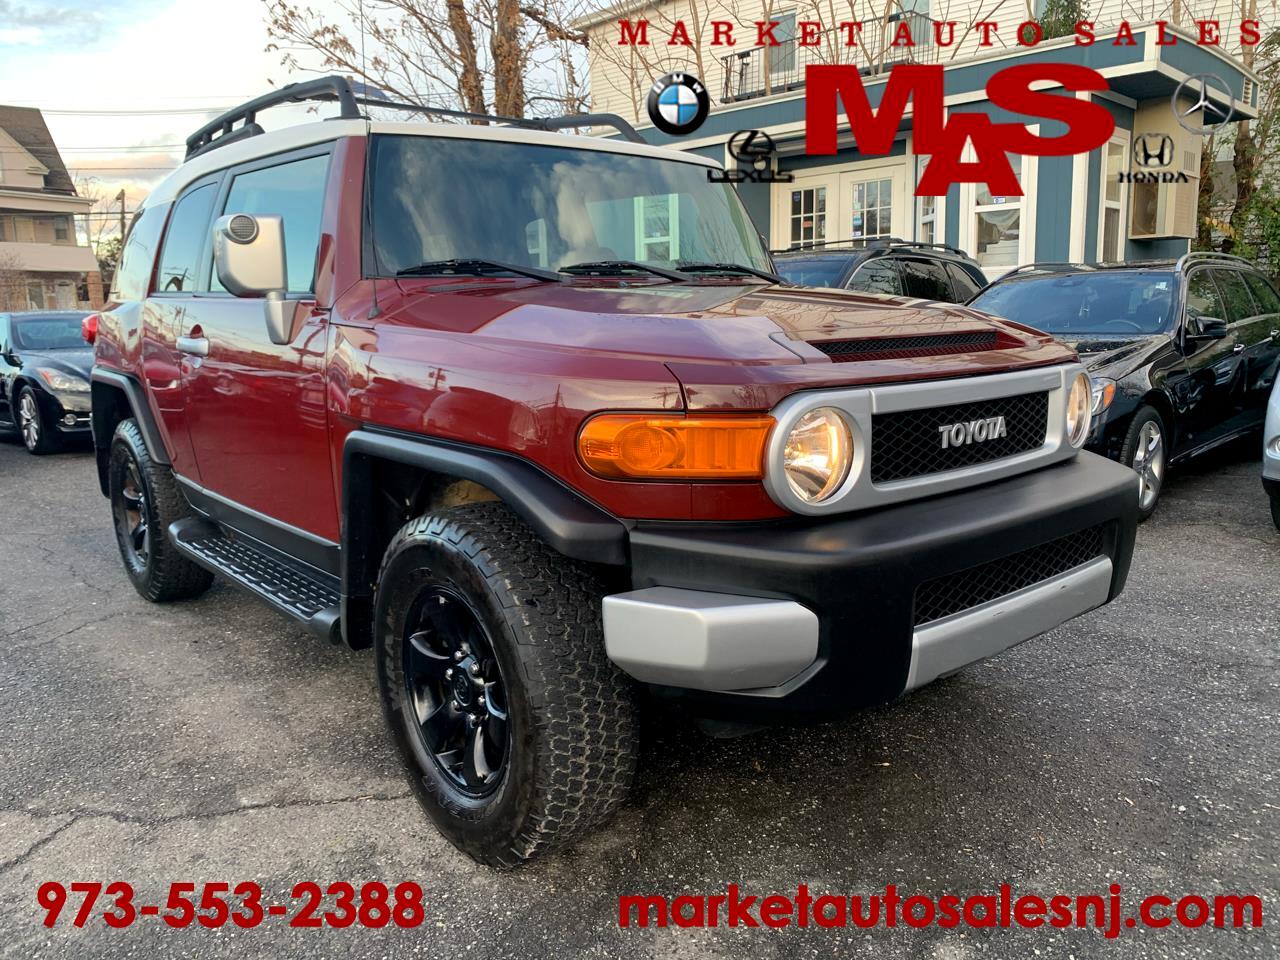 Used 2010 Toyota Fj Cruiser 4wd At For Sale In Paterson Nj 07513